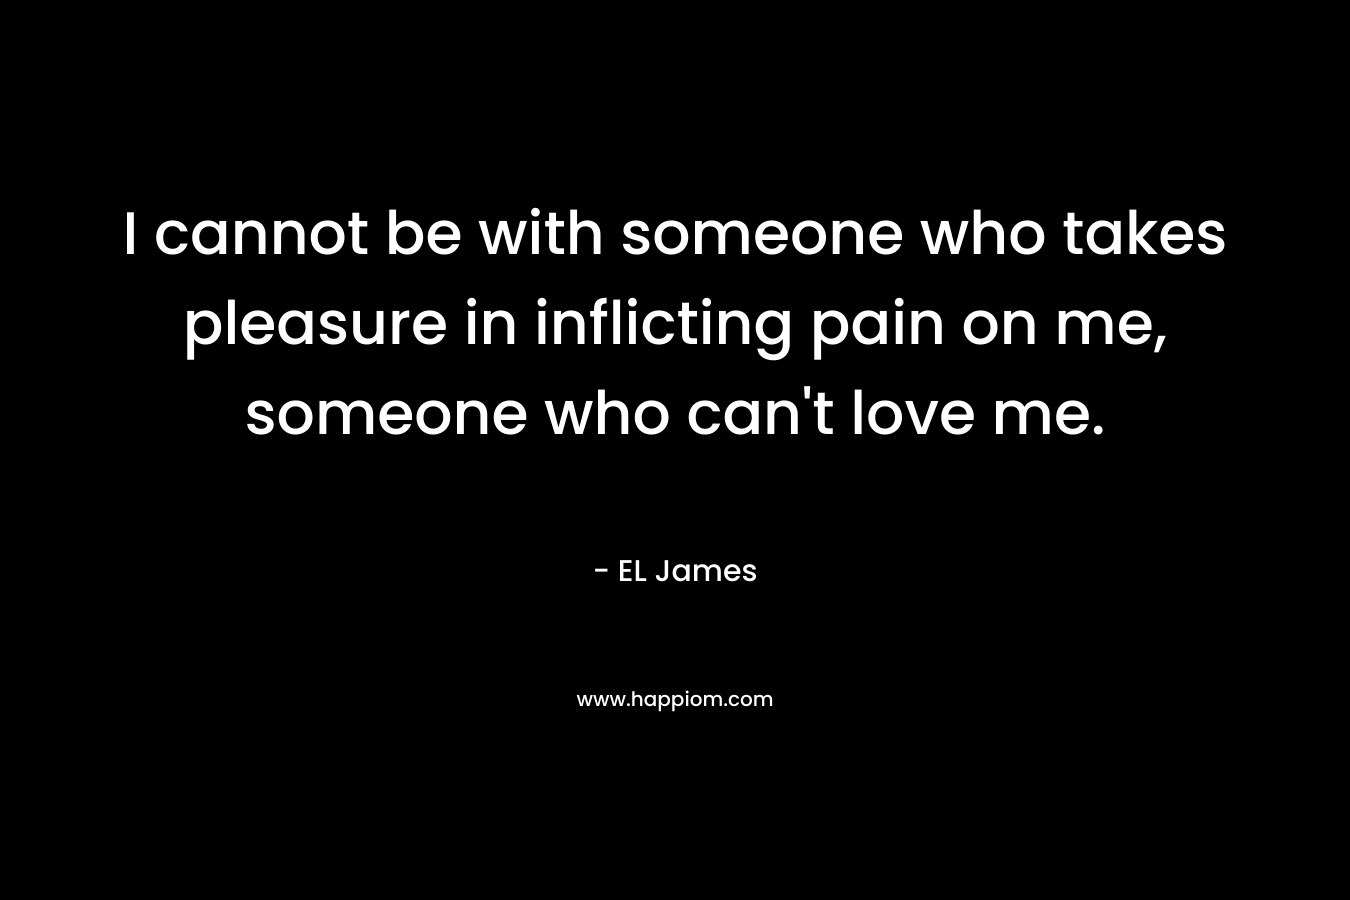 I cannot be with someone who takes pleasure in inflicting pain on me, someone who can’t love me. – EL James